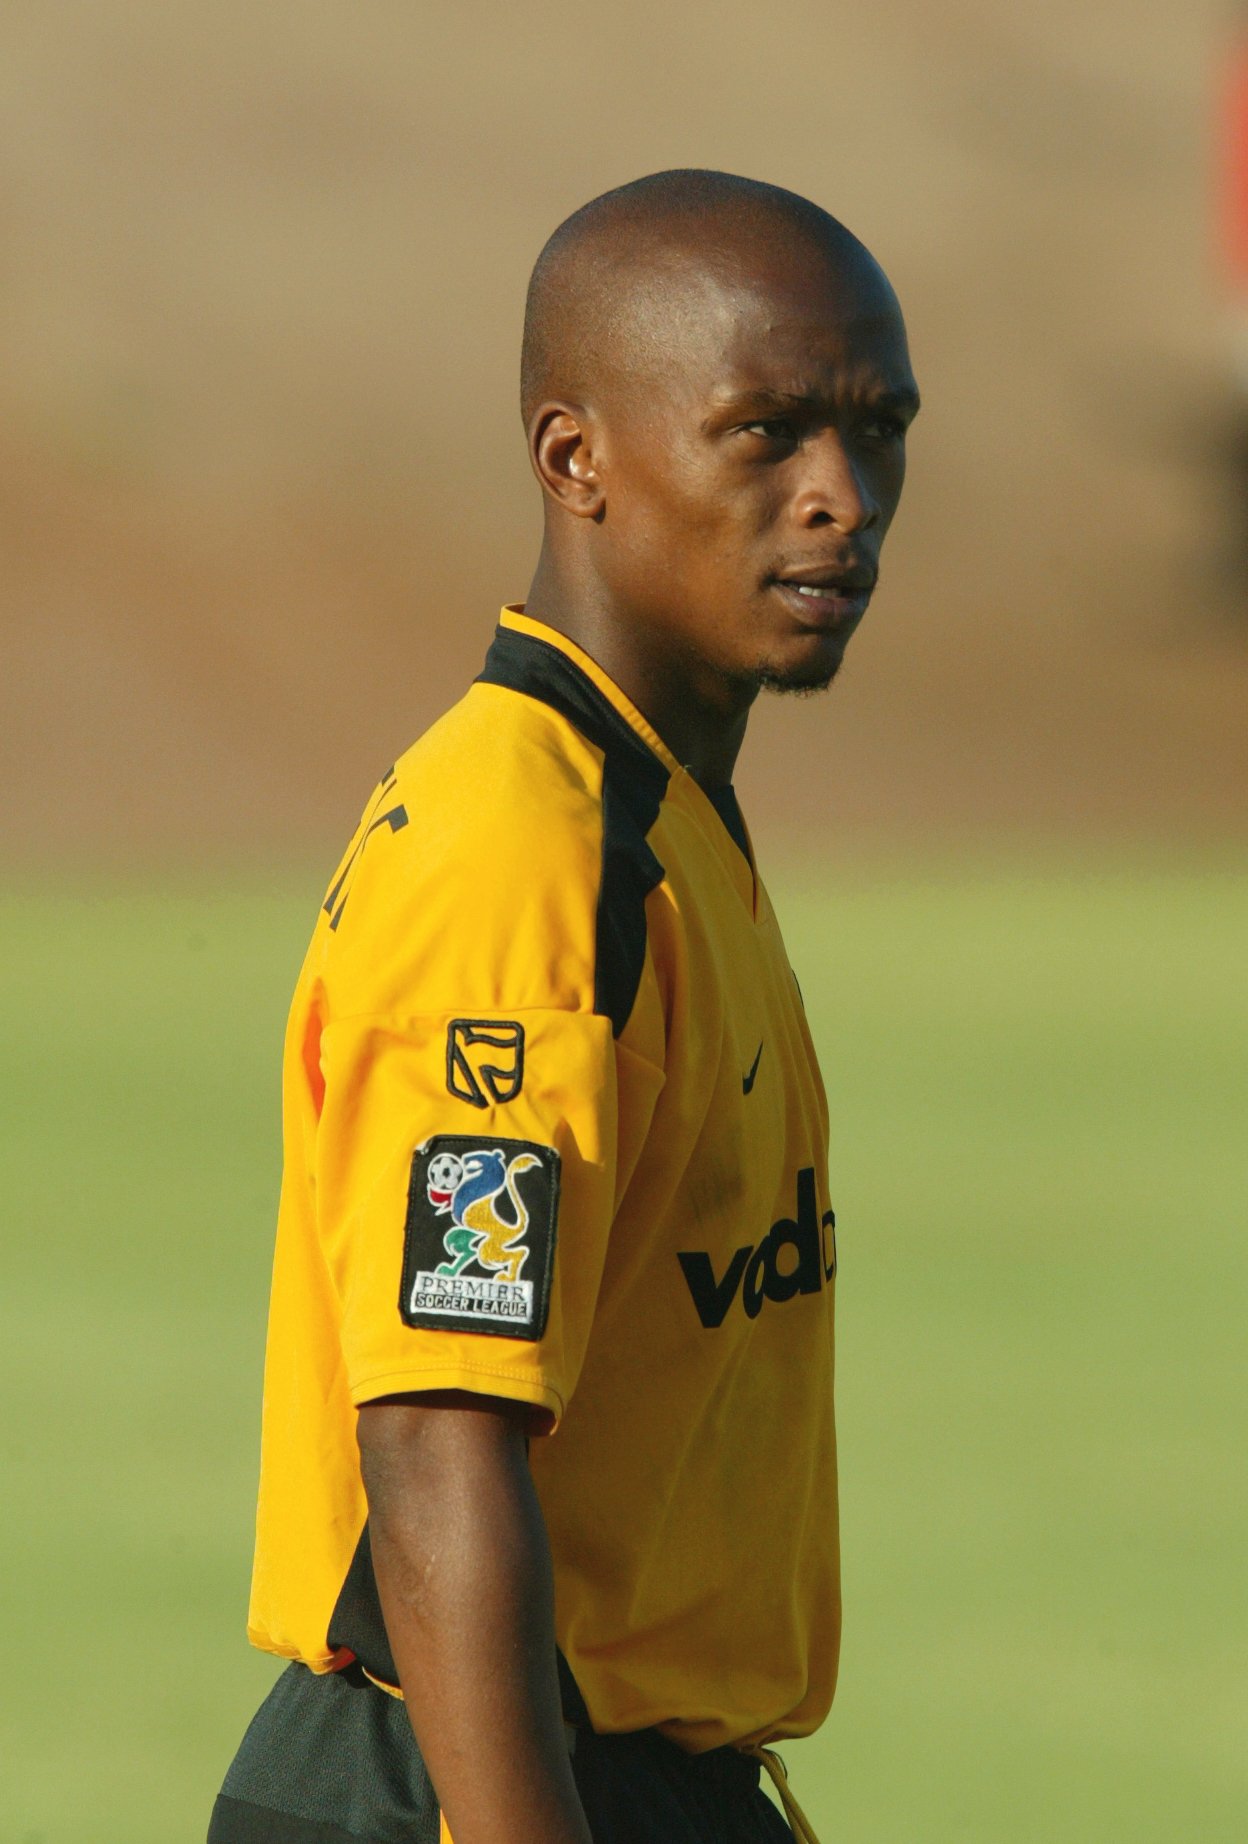 They Set Dogs On Lucky Maselesele: Aunt Reveals Details On Horrific Death Of Kaizer Chiefs Ex-Player